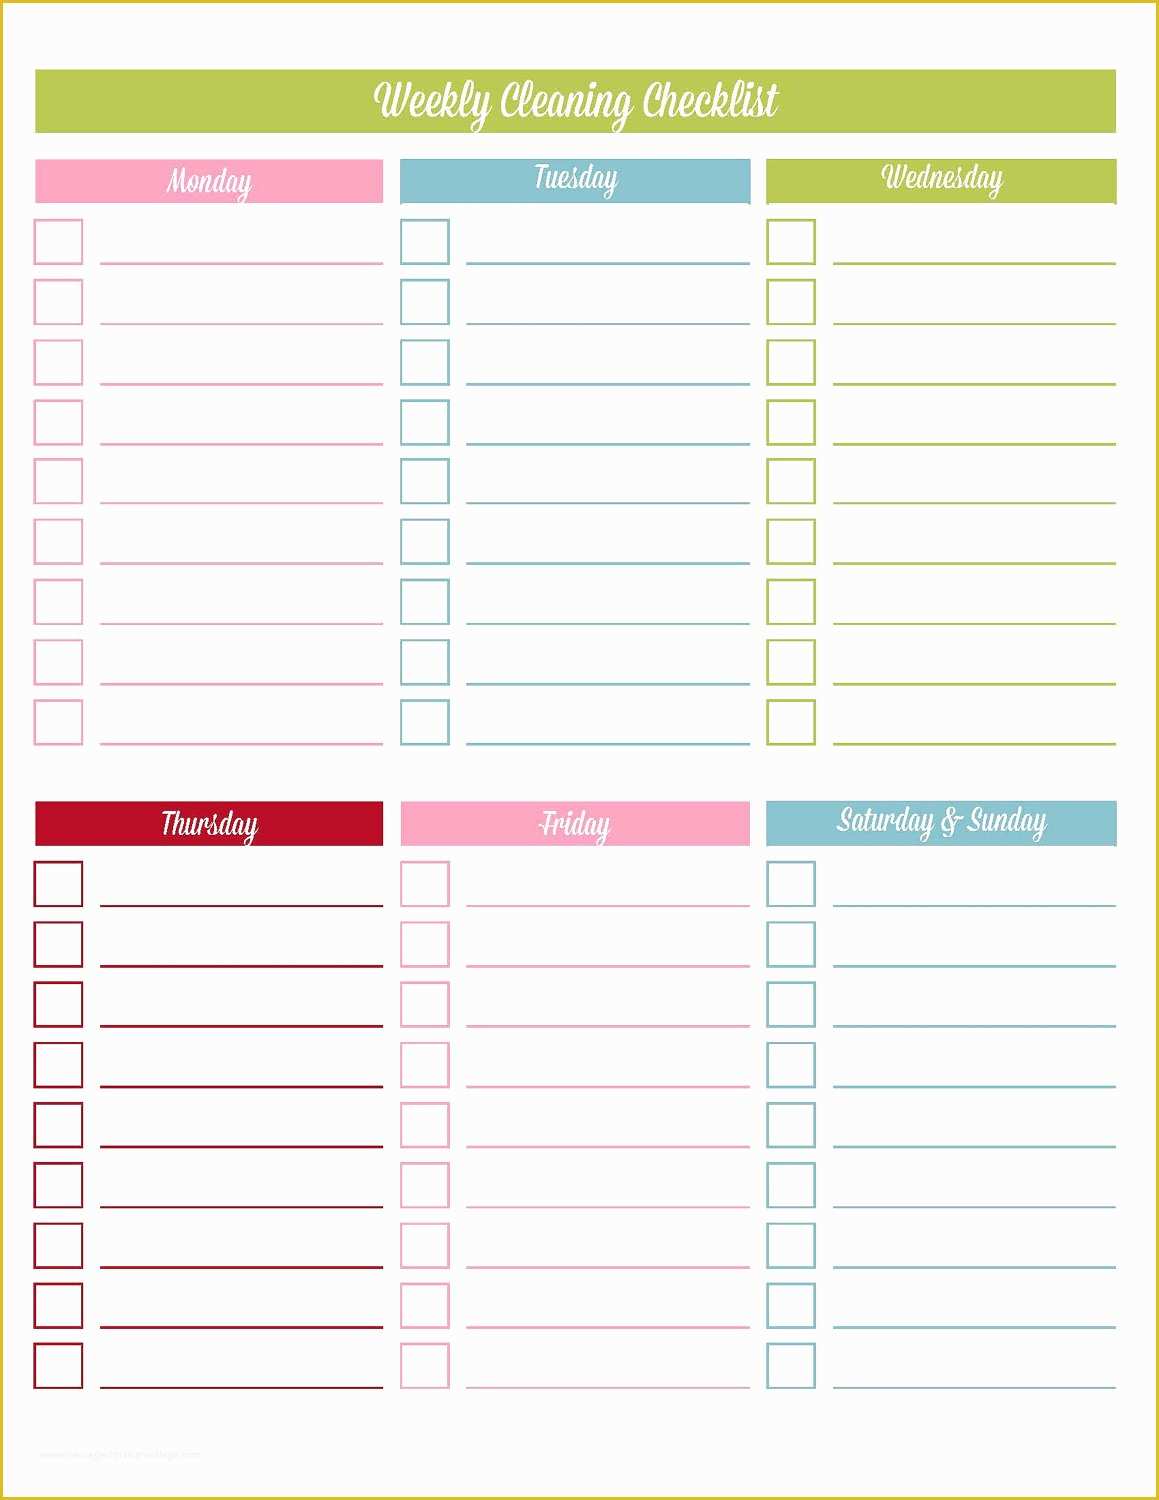 Free Editable Cheque Template Of Weekly Cleaning Checklist Editable Printable Pdf Instant